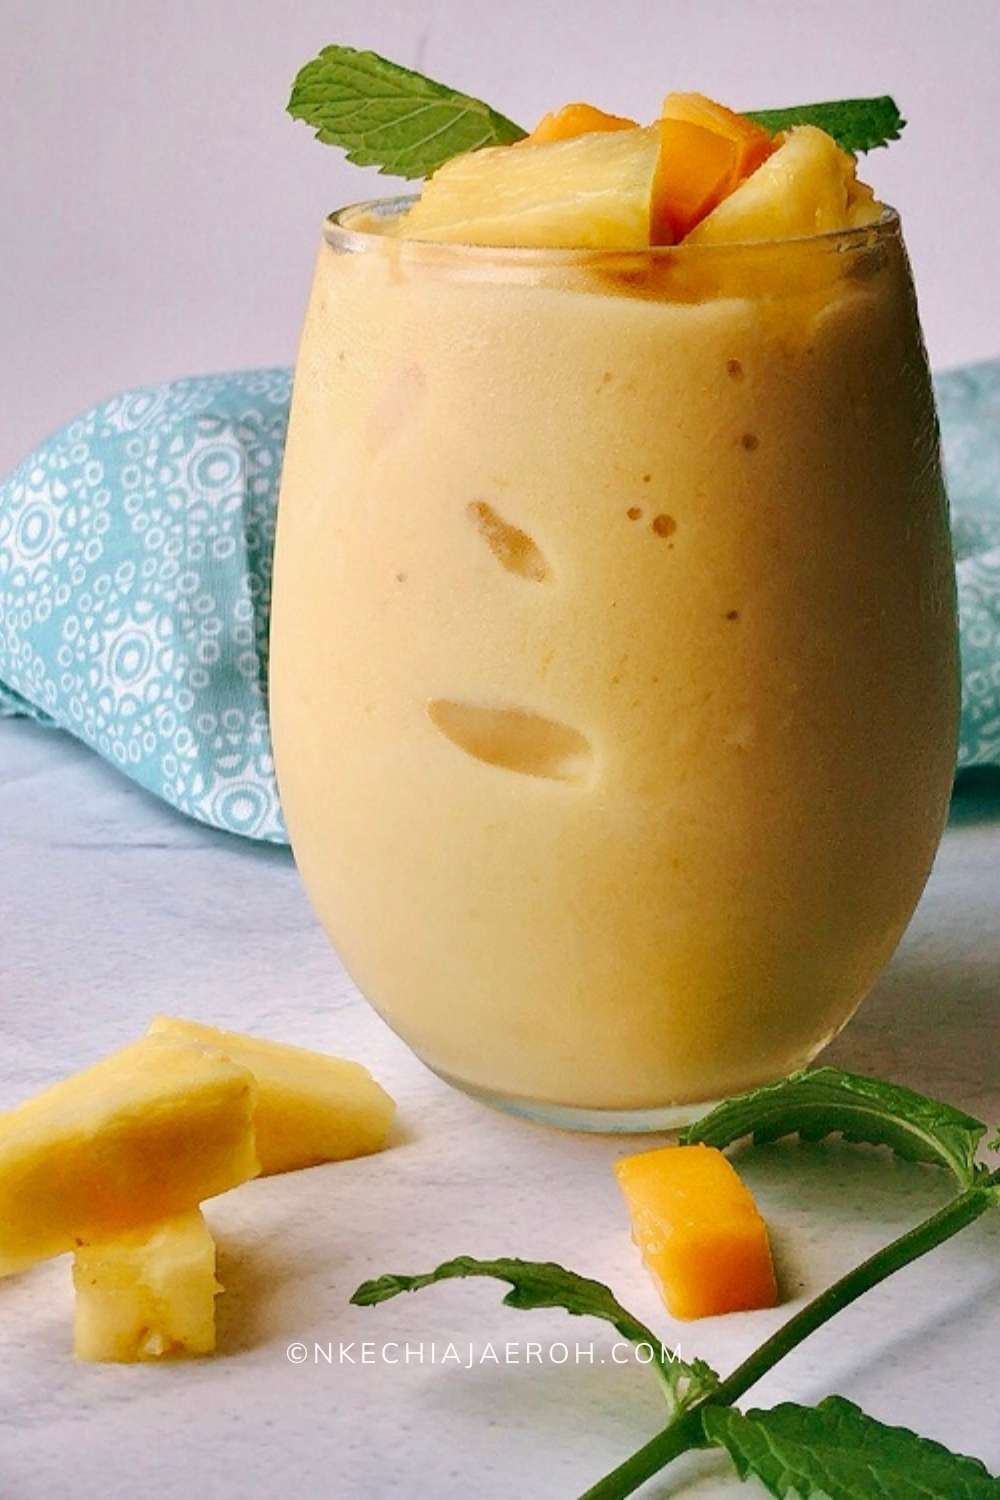 Healthy and nutritious mango pineapple smoothie recipe is refreshing and perfect for those hot days! We call it "nice cream" around here, and the kids love it! This creamy tropical smoothie deliciousness can easily replace your ice cream.  To make this vegan mango pineapple smoothie, you will need only five ingredients and a high-speed blender. A thick smoothie by nature, but you can thin it out by adding more liquid. #Tropicalsmoothie #Mangosmoothie #summersmothie #Pineapplesmoothie #nicecream